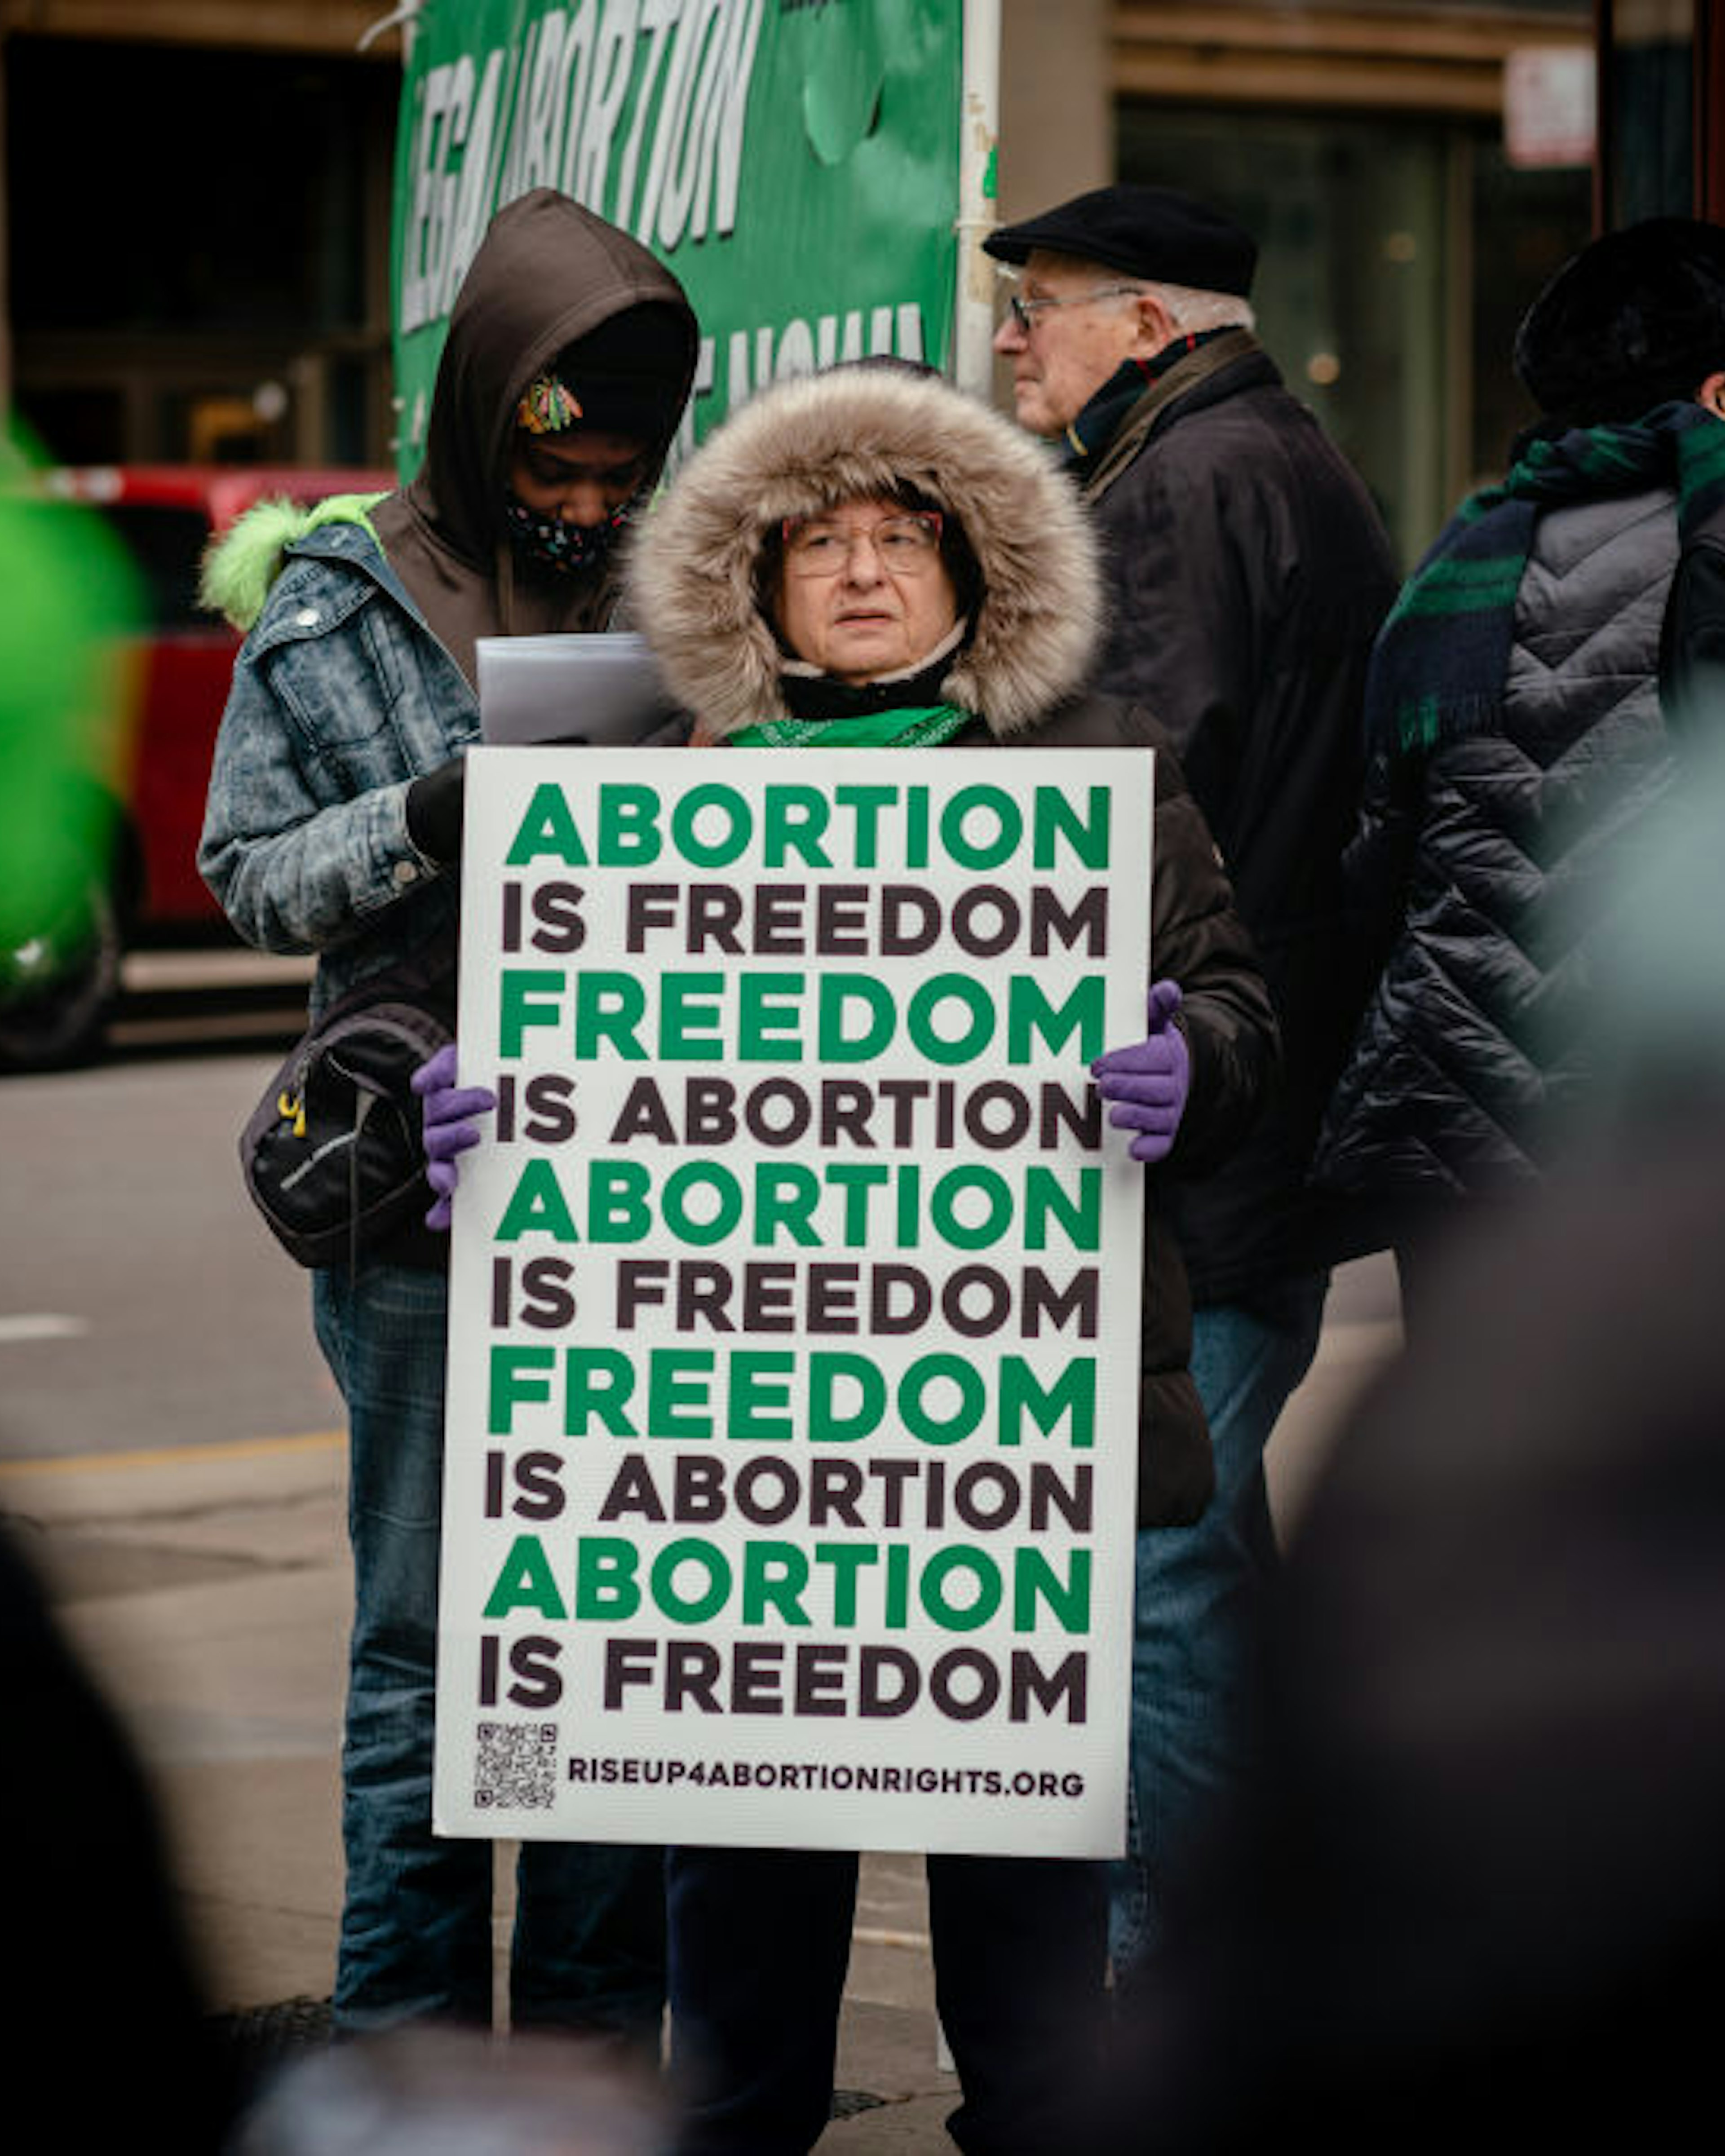 A demonstrator holds a pro-abortion sign during a protest against Walgreens on International Women's Day in Chicago, Illinois, US, on Wednesday, March 8, 2023. After announcing it will not dispense an abortion pill in 21 states where Republican attorneys general have threatened legal action against pharmacies distributing the medicine, Walgreens has landed in the center of a consumer and political controversy, The New York Times reports. Photographer: Jamie Kelter Davis/Bloomberg via Getty Images